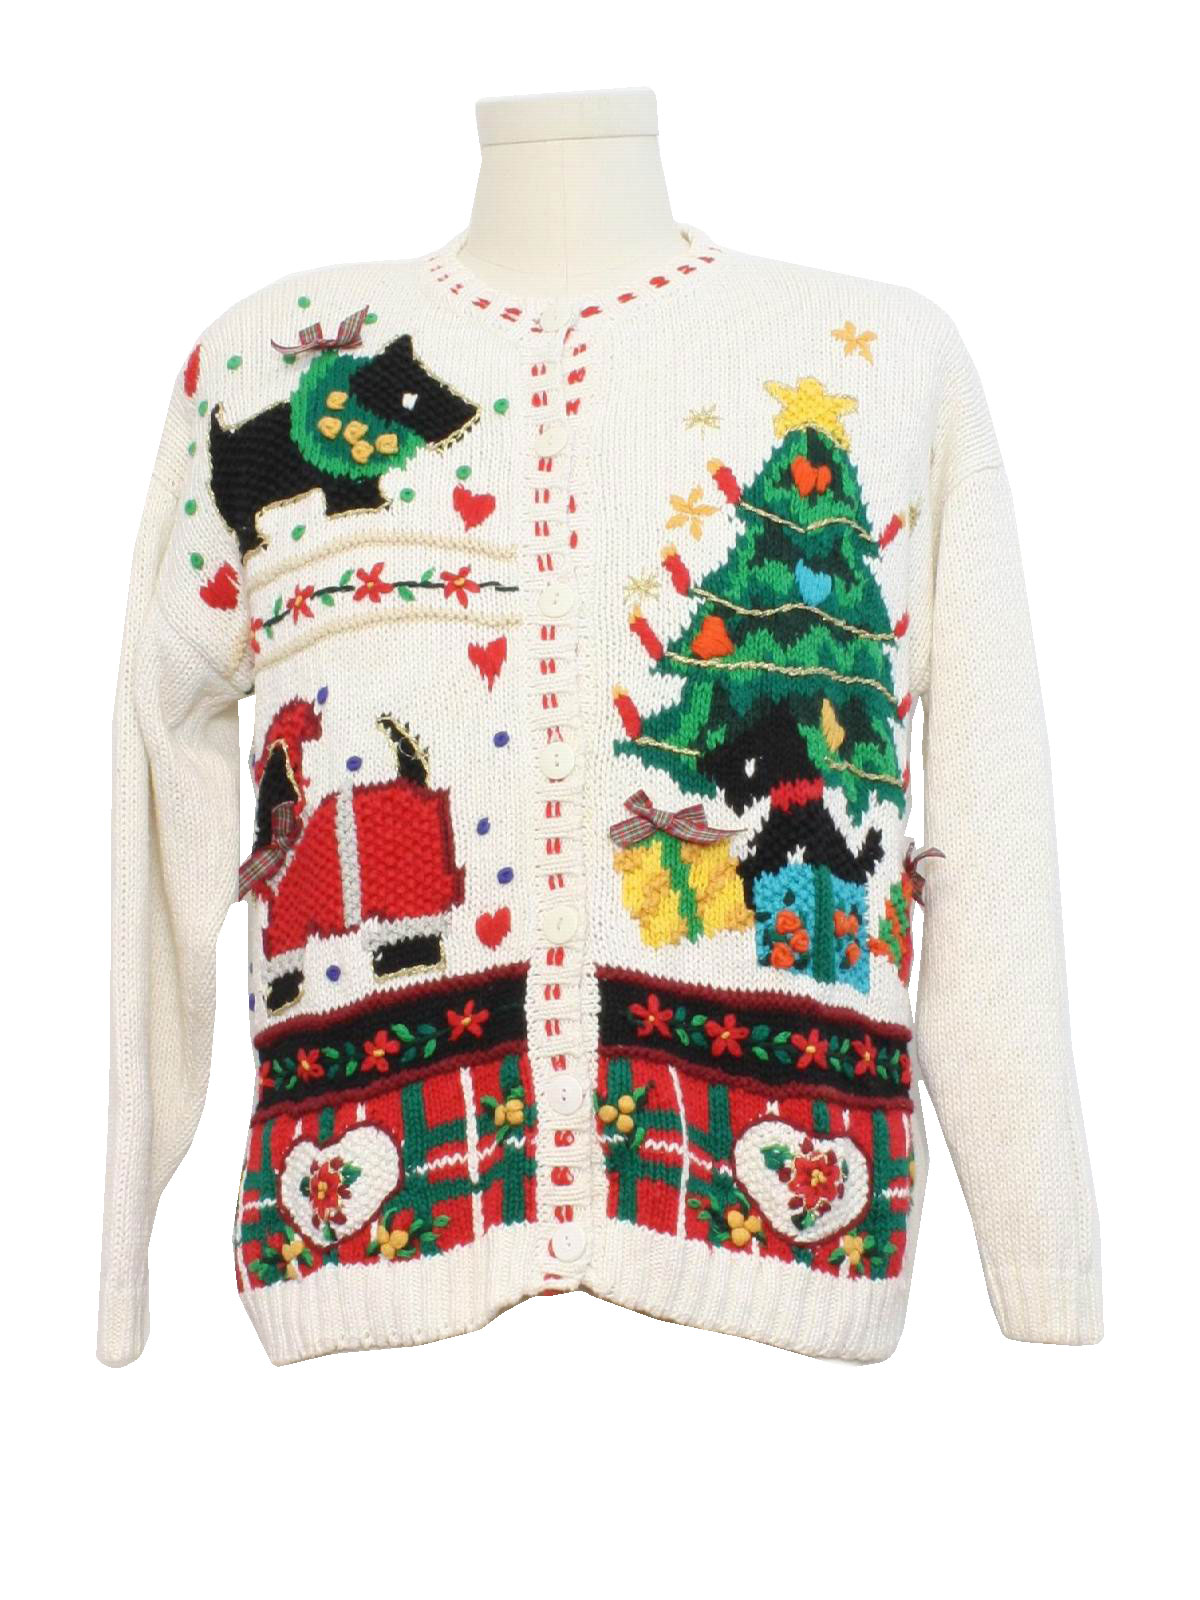 Womens Ugly Christmas Sweater: -Andrea Lauren- Womens ivory background ...